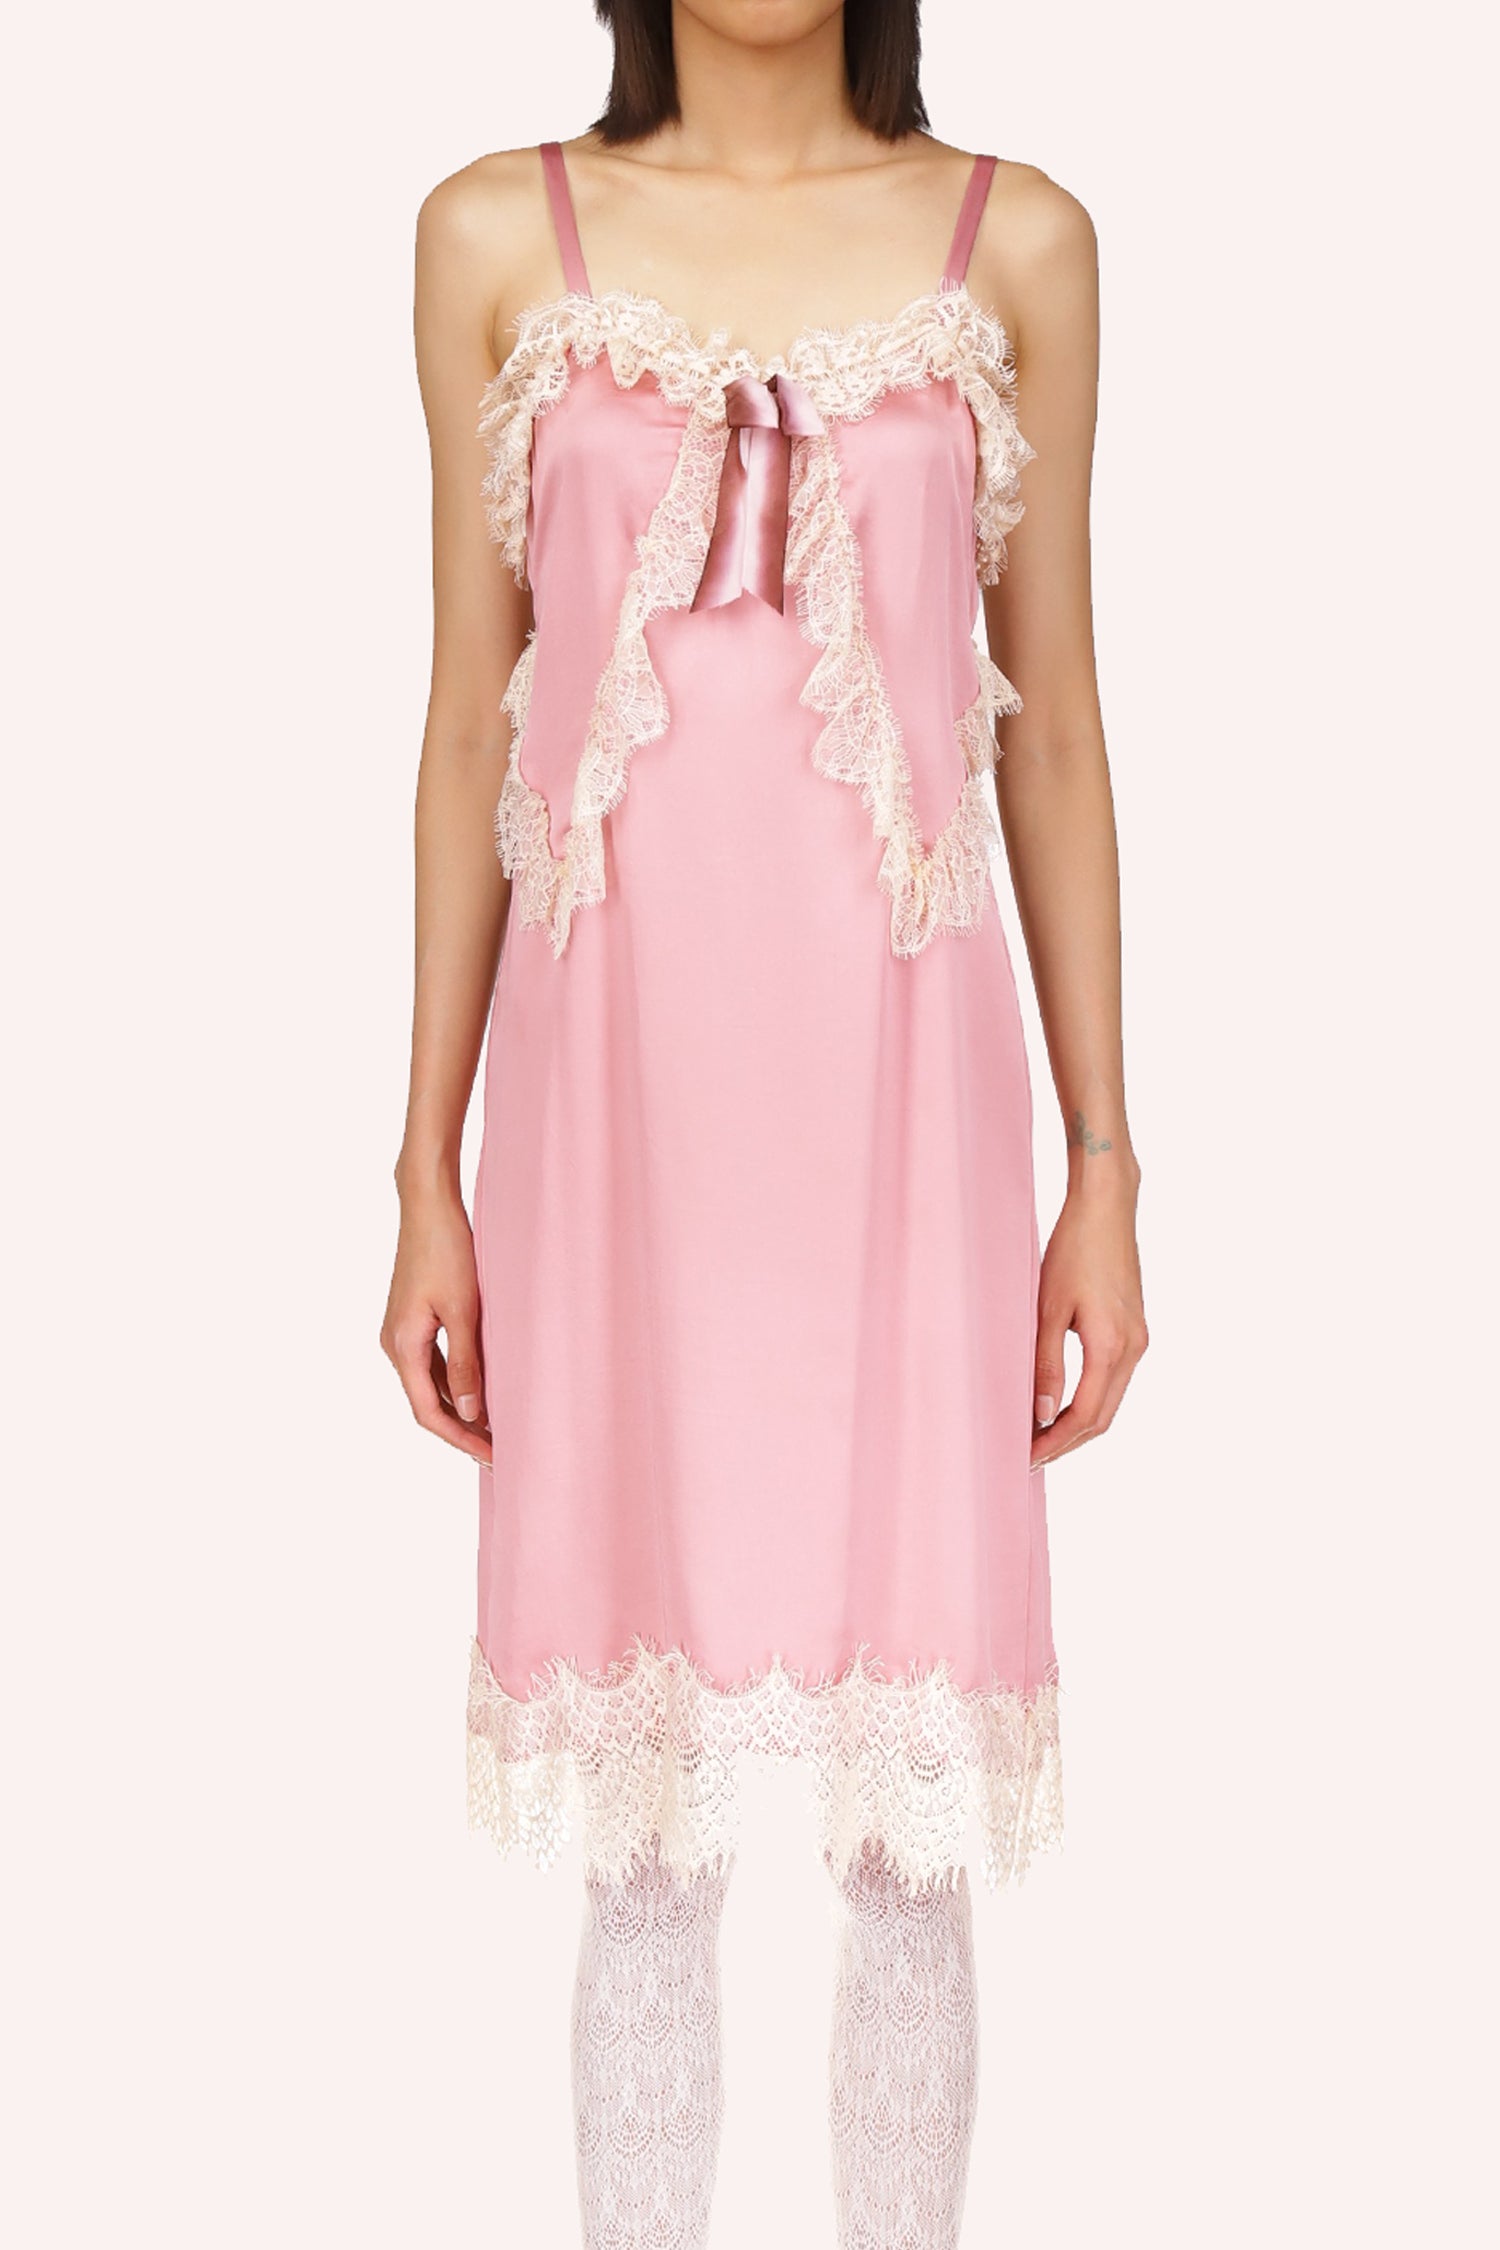 Knee long, sleeveless, white lace triangle, pink ribbon, shoulders straps, white lace top and bottom